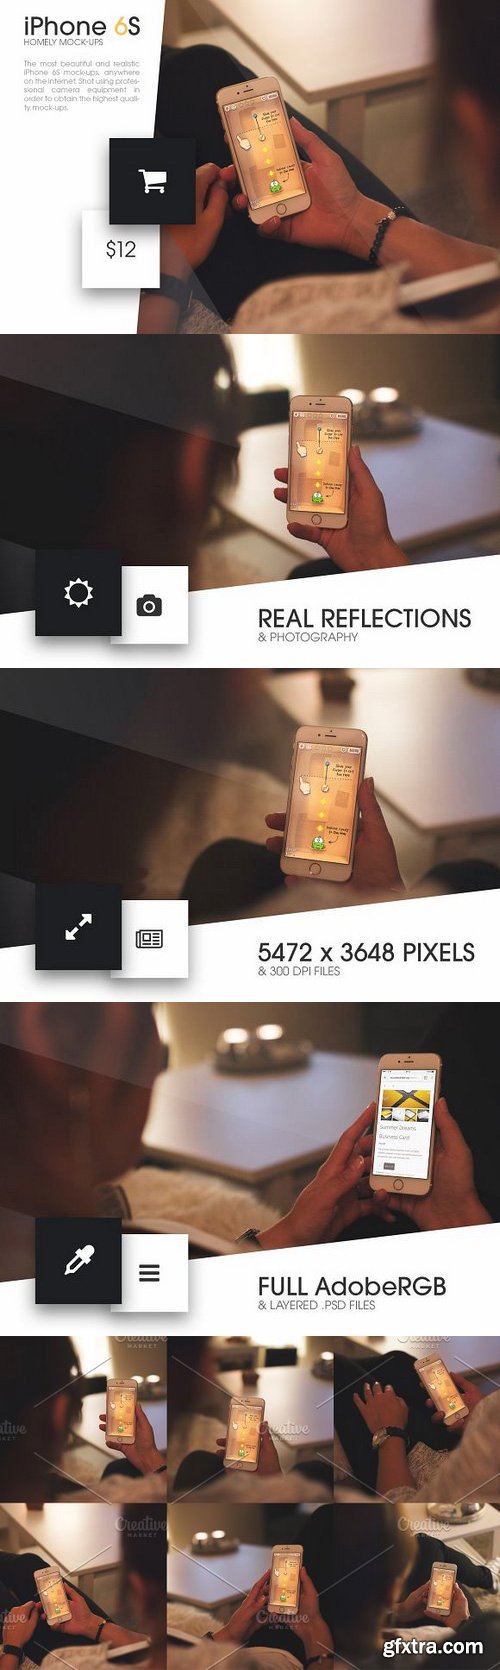 CM - iPhone 6S Homely Mock-Ups 376247